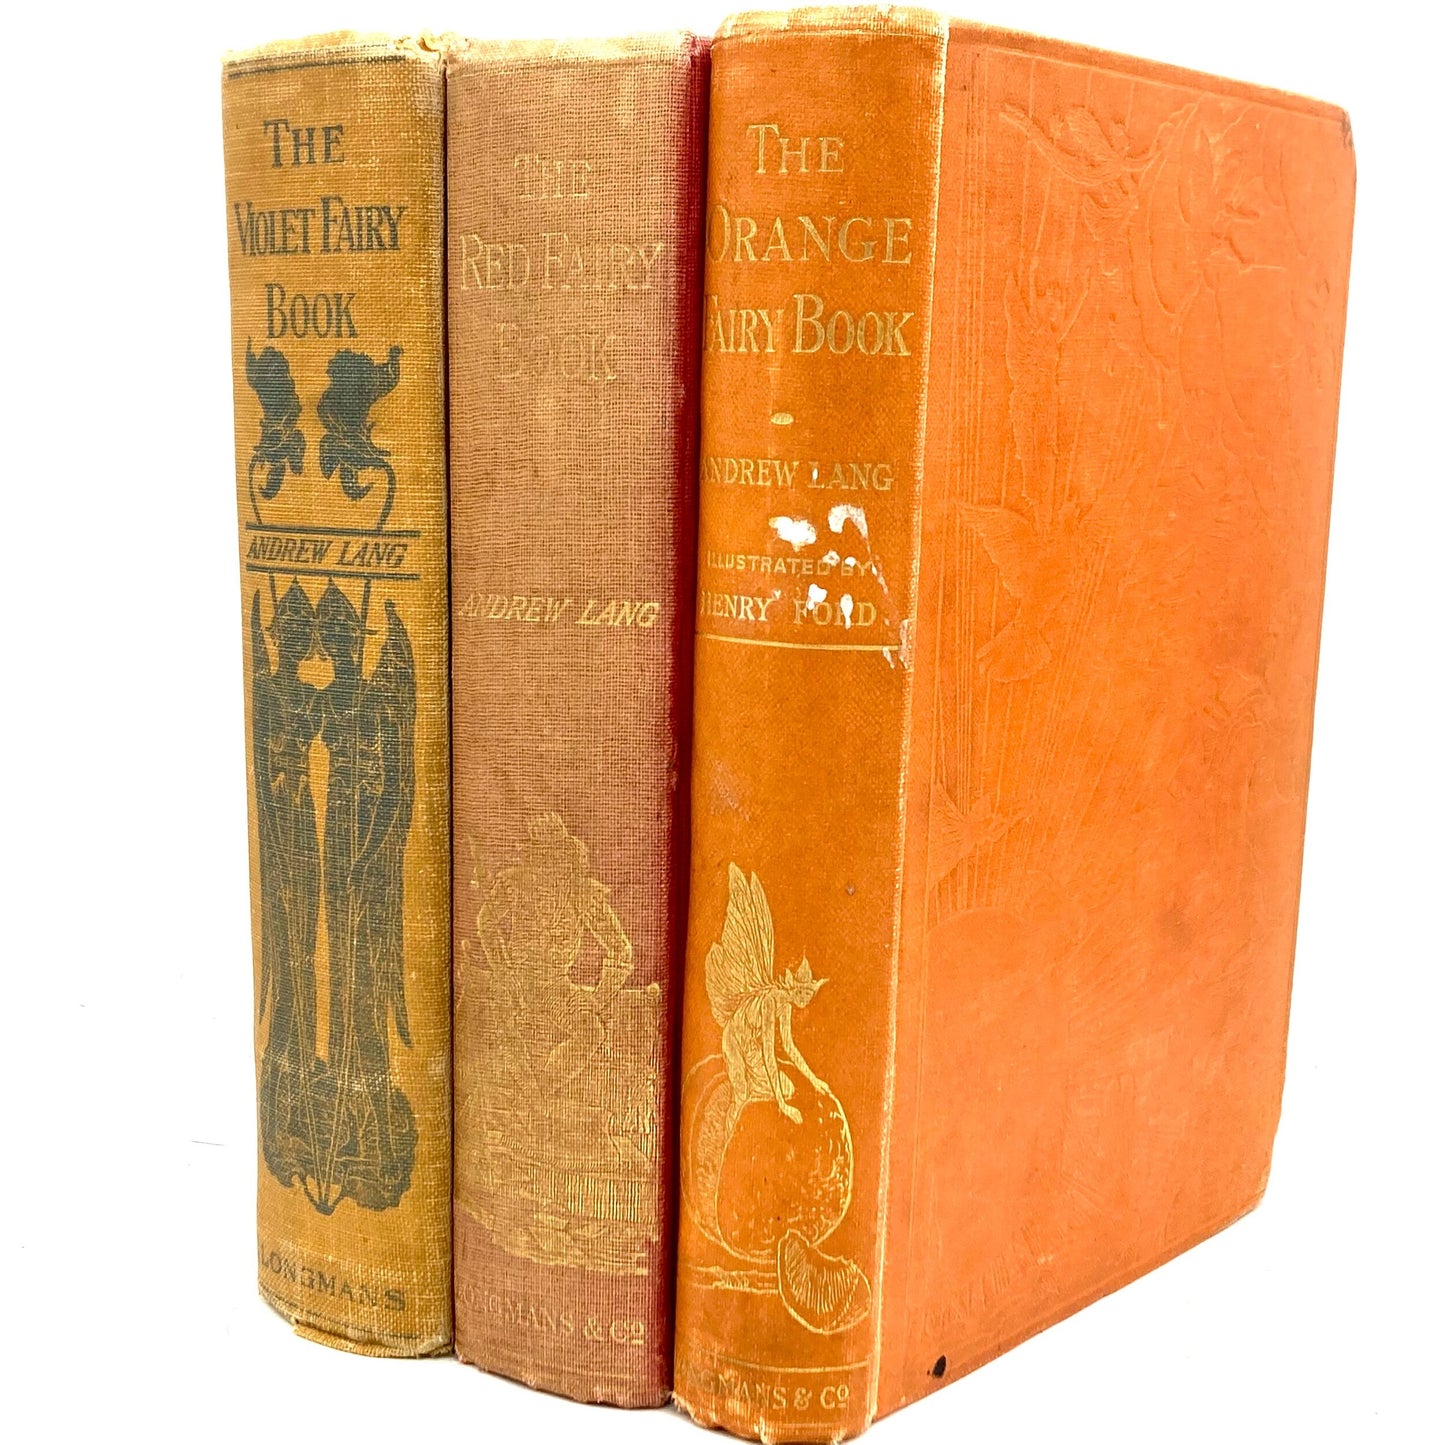 LANG, Andrew - Complete Set of 12 "Fairy Books" [Longmans, Green & Co, 1914-1925] - Buzz Bookstore